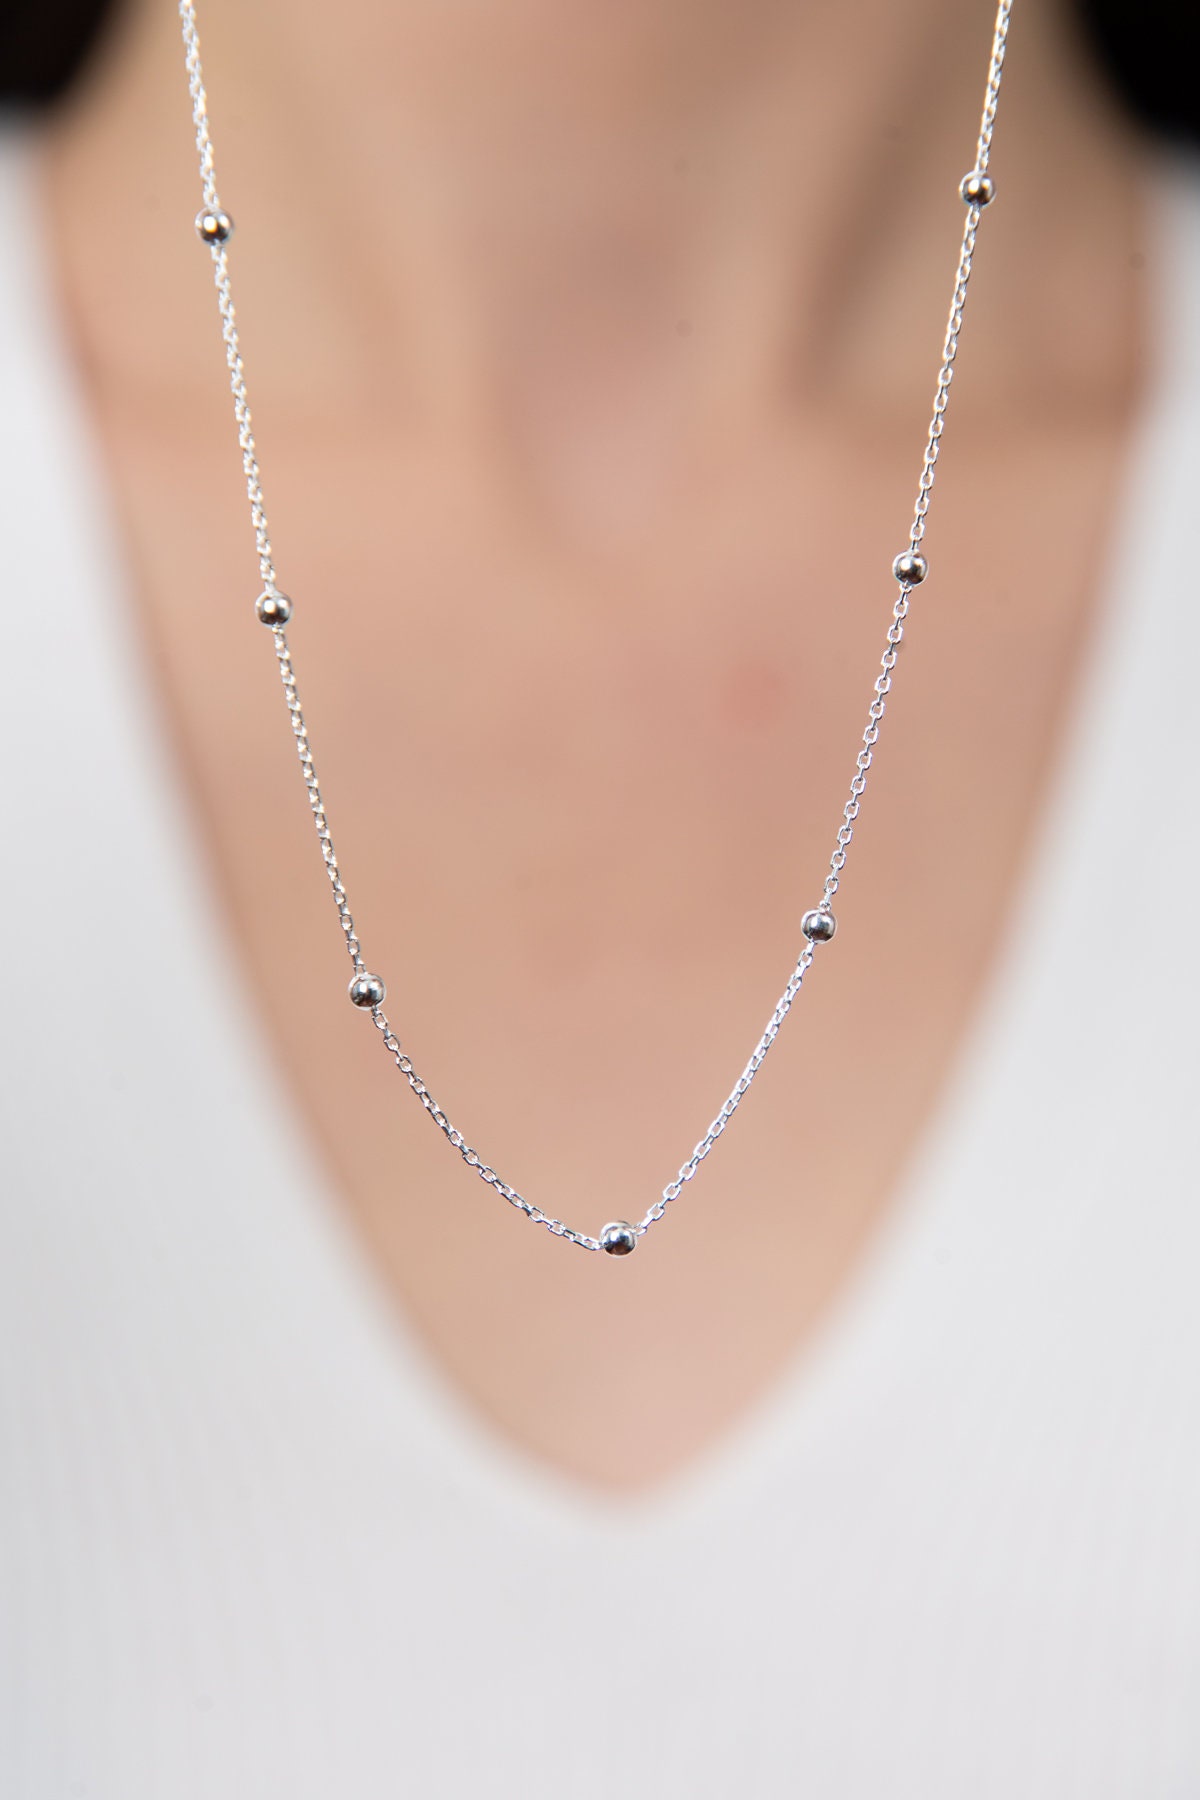 14k Gold Beaded Satellite Chain,Gold Filled,Sterling Silver or Rose,Dew Drops,Simple,Everday Layering Necklace,QW31 Sieraden Kettingen Kettingen 